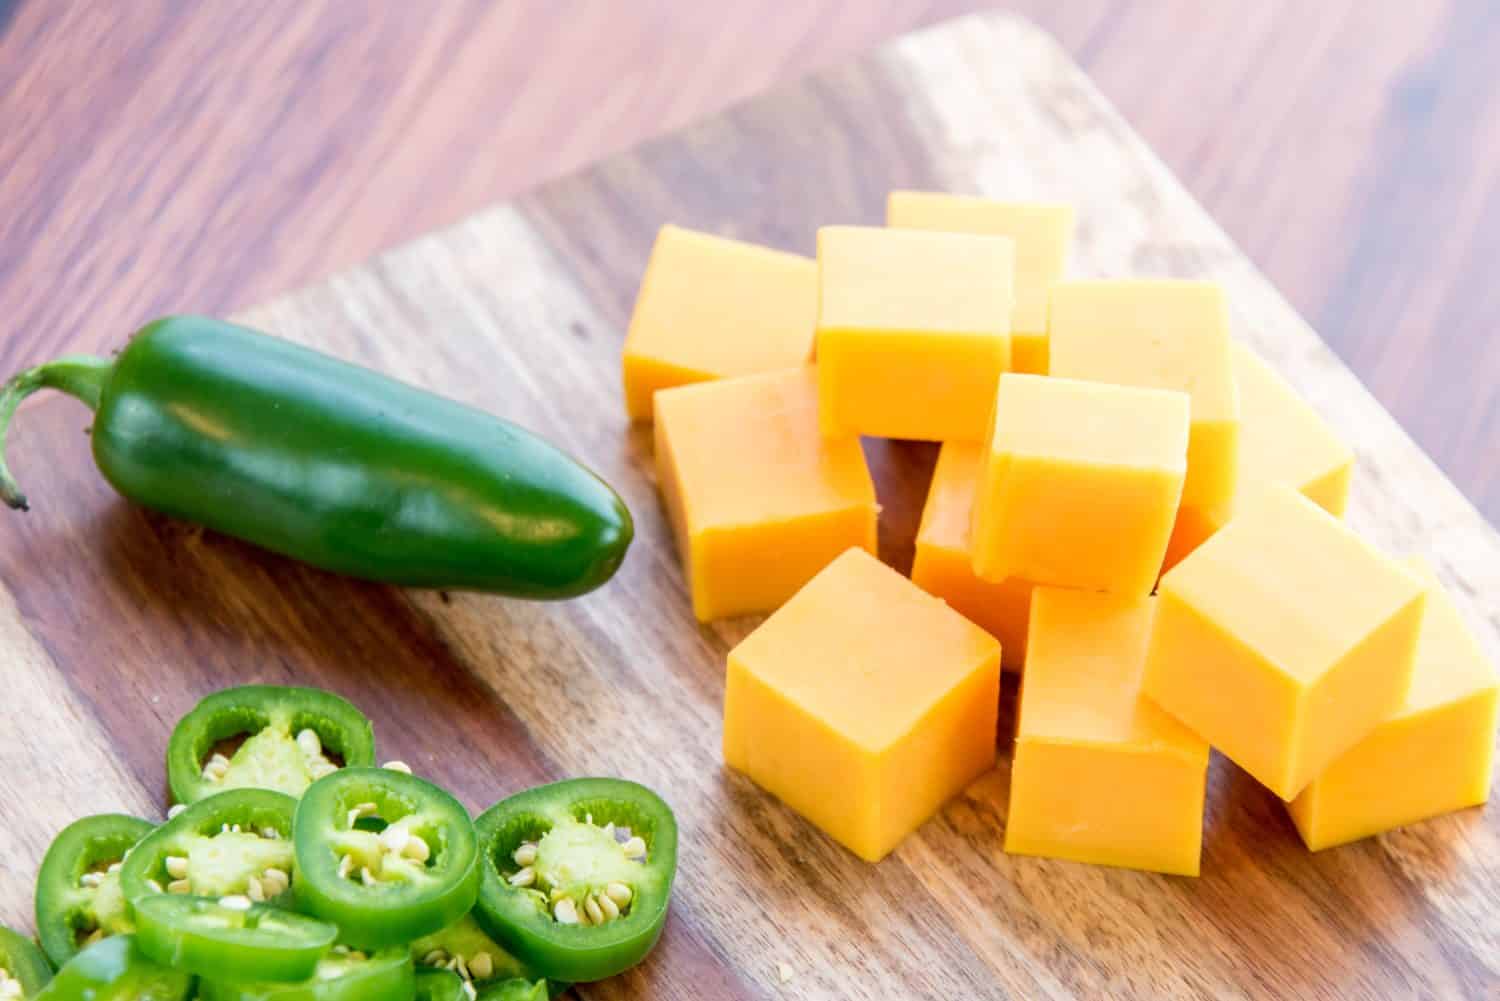 fresh sliced jalapeno peppers and cheddar cheese